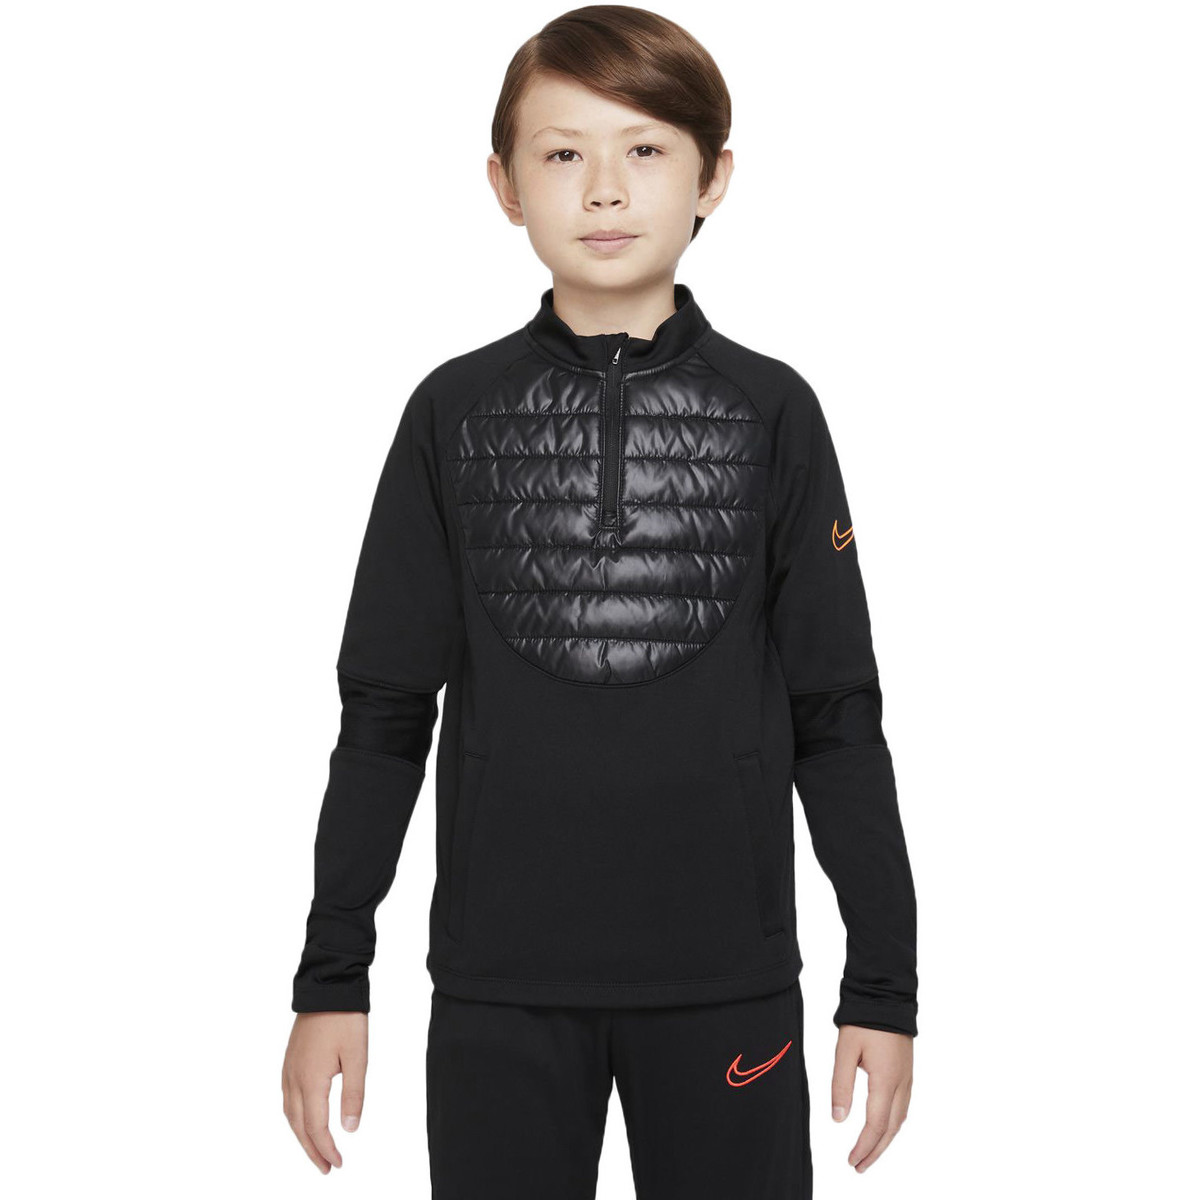 Nike Noir Training Top Therma-fit Academy Winter Warrior UKReTHAP